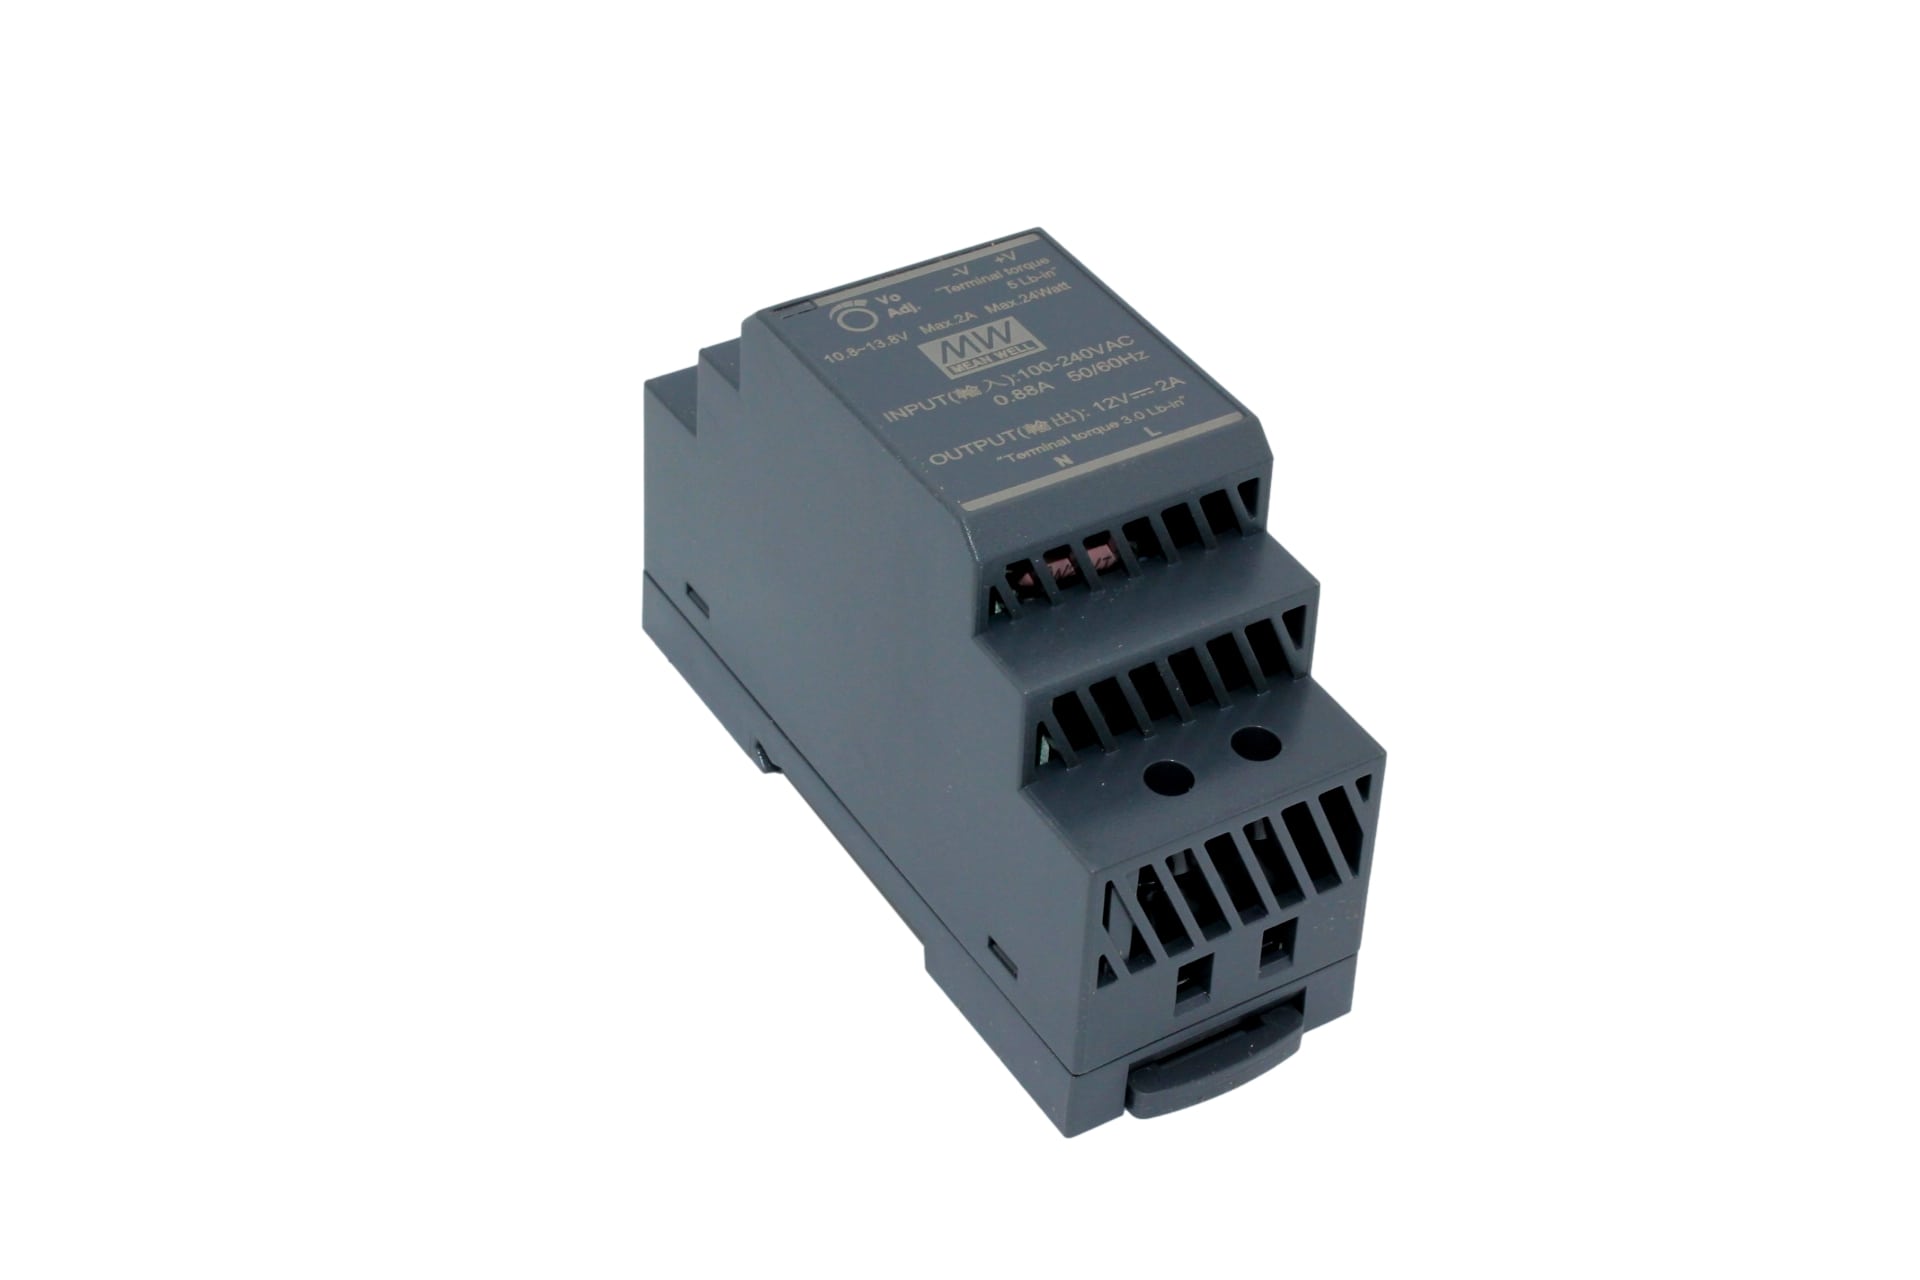 HDR-30-12 DIN rail power supply, 24W, 12V, 2A, MEAN WELL